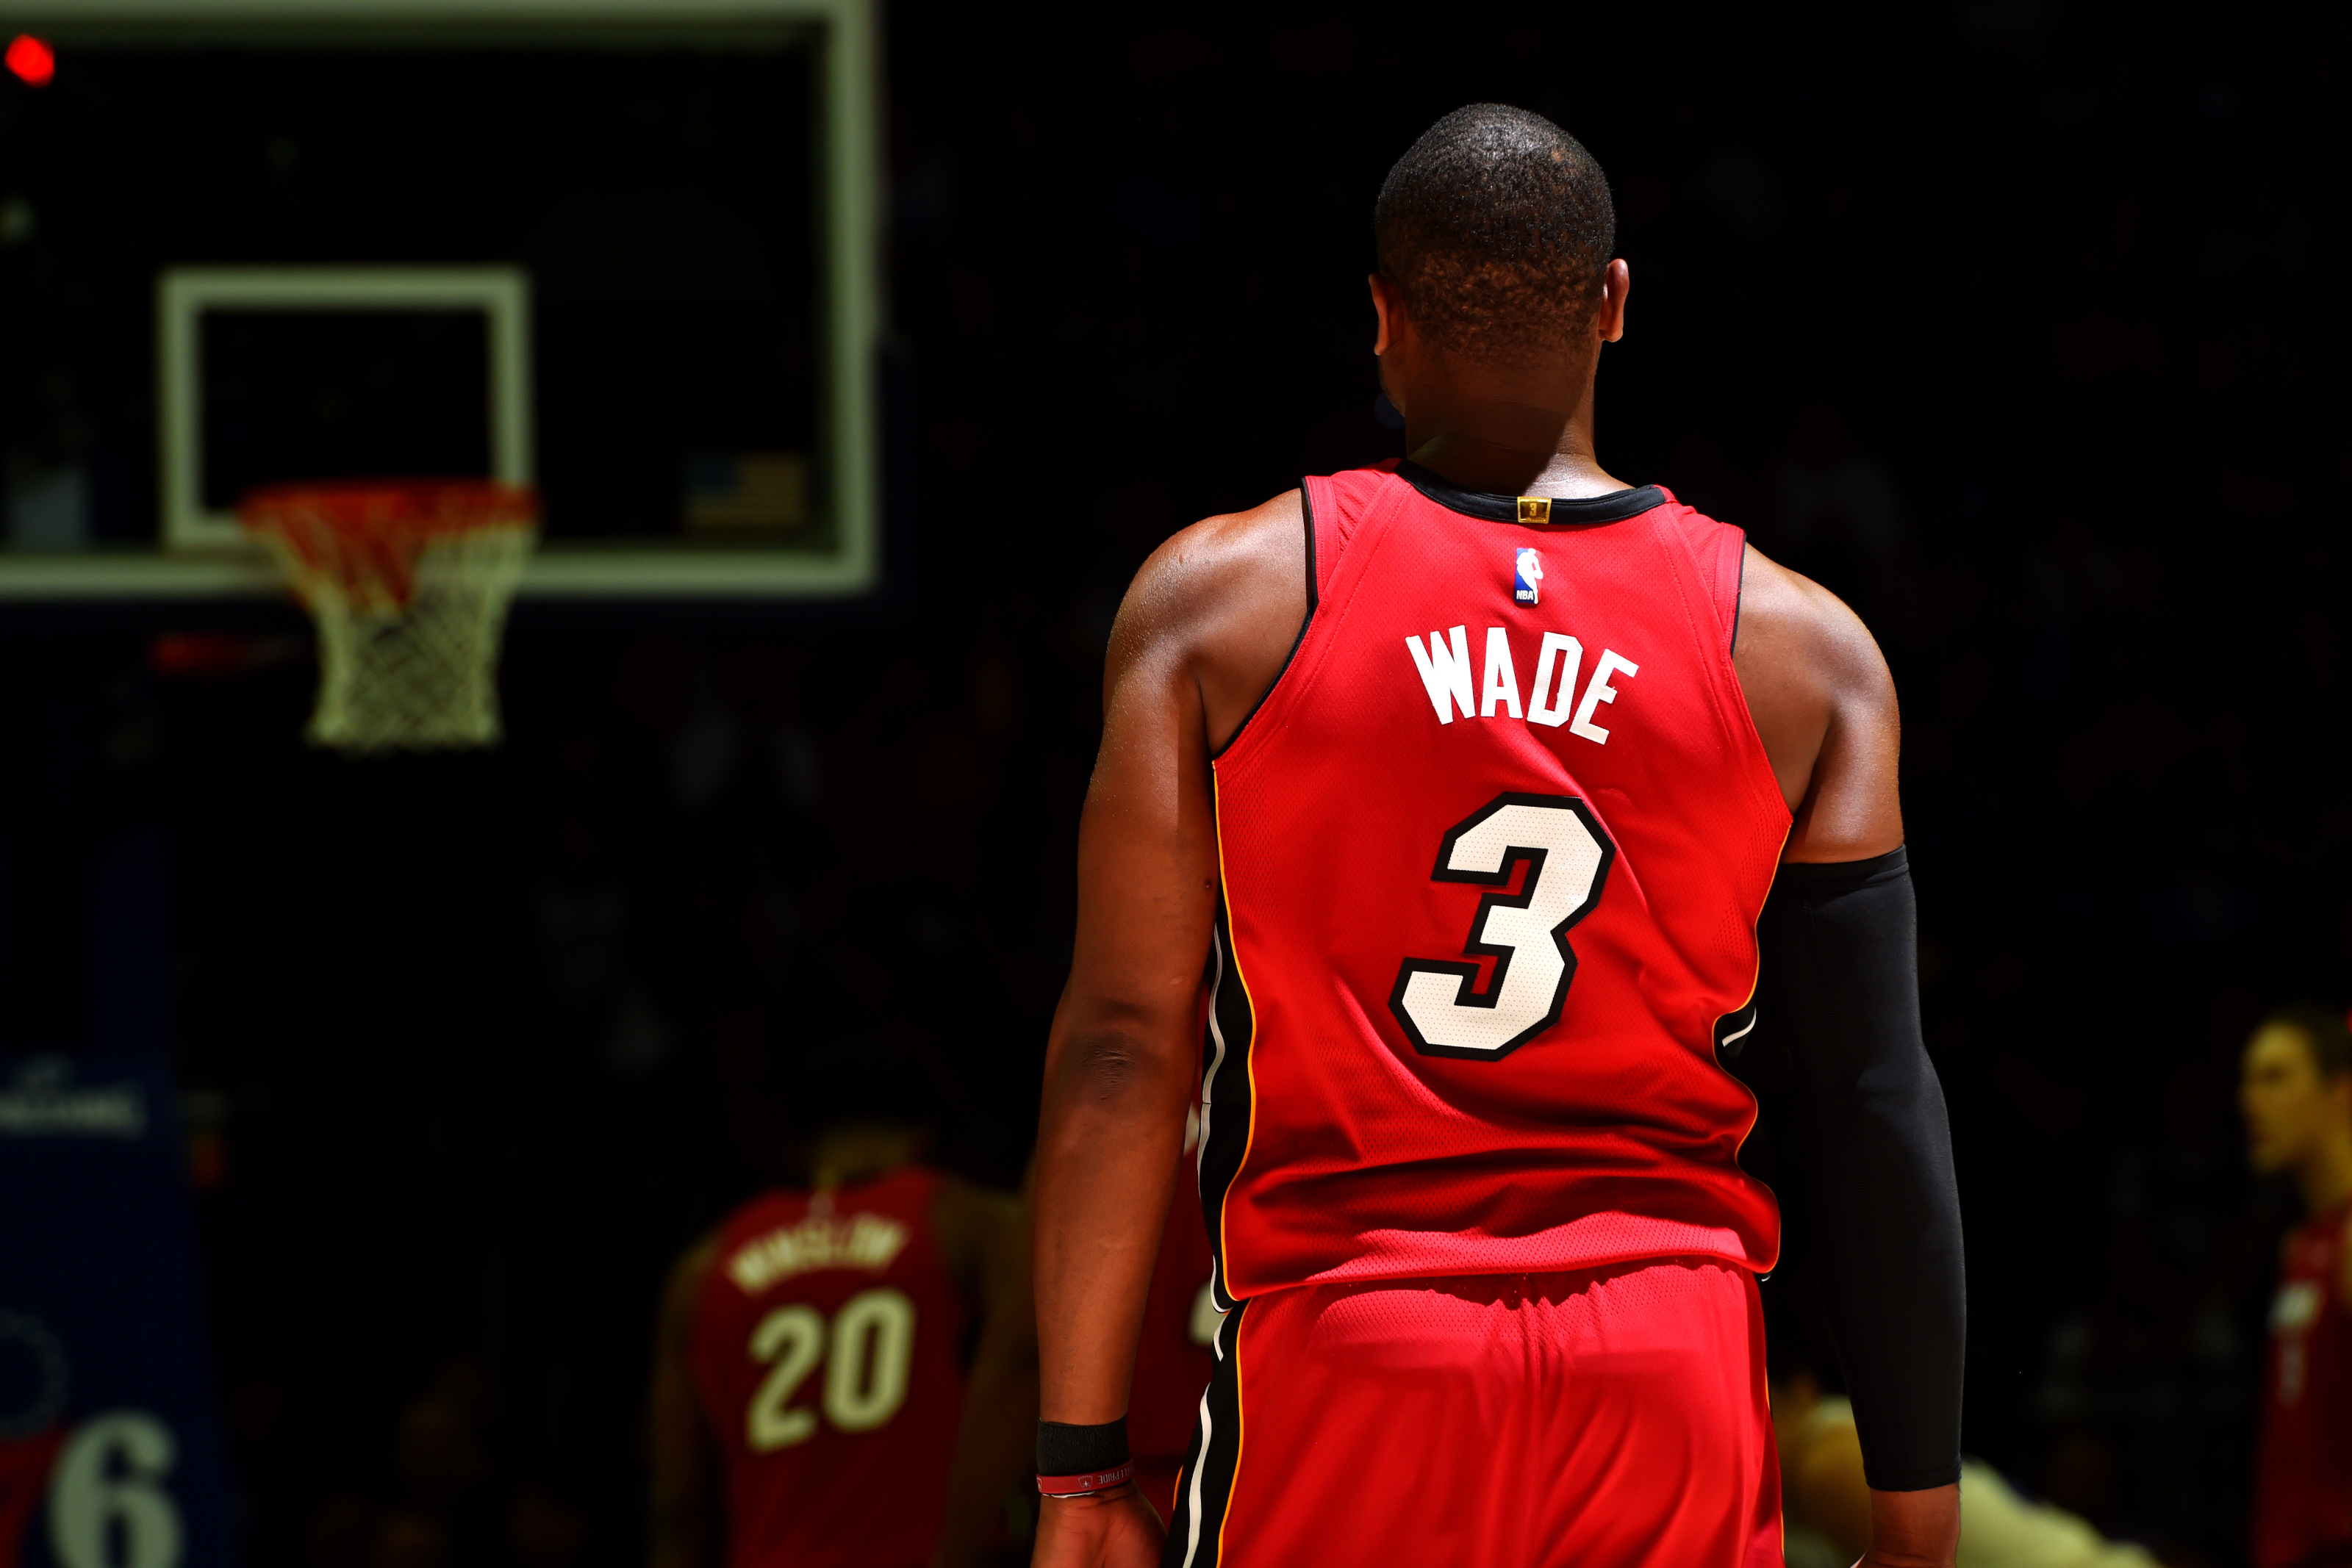 Report: Dwyane Wade could be ready to leave the Miami Heat